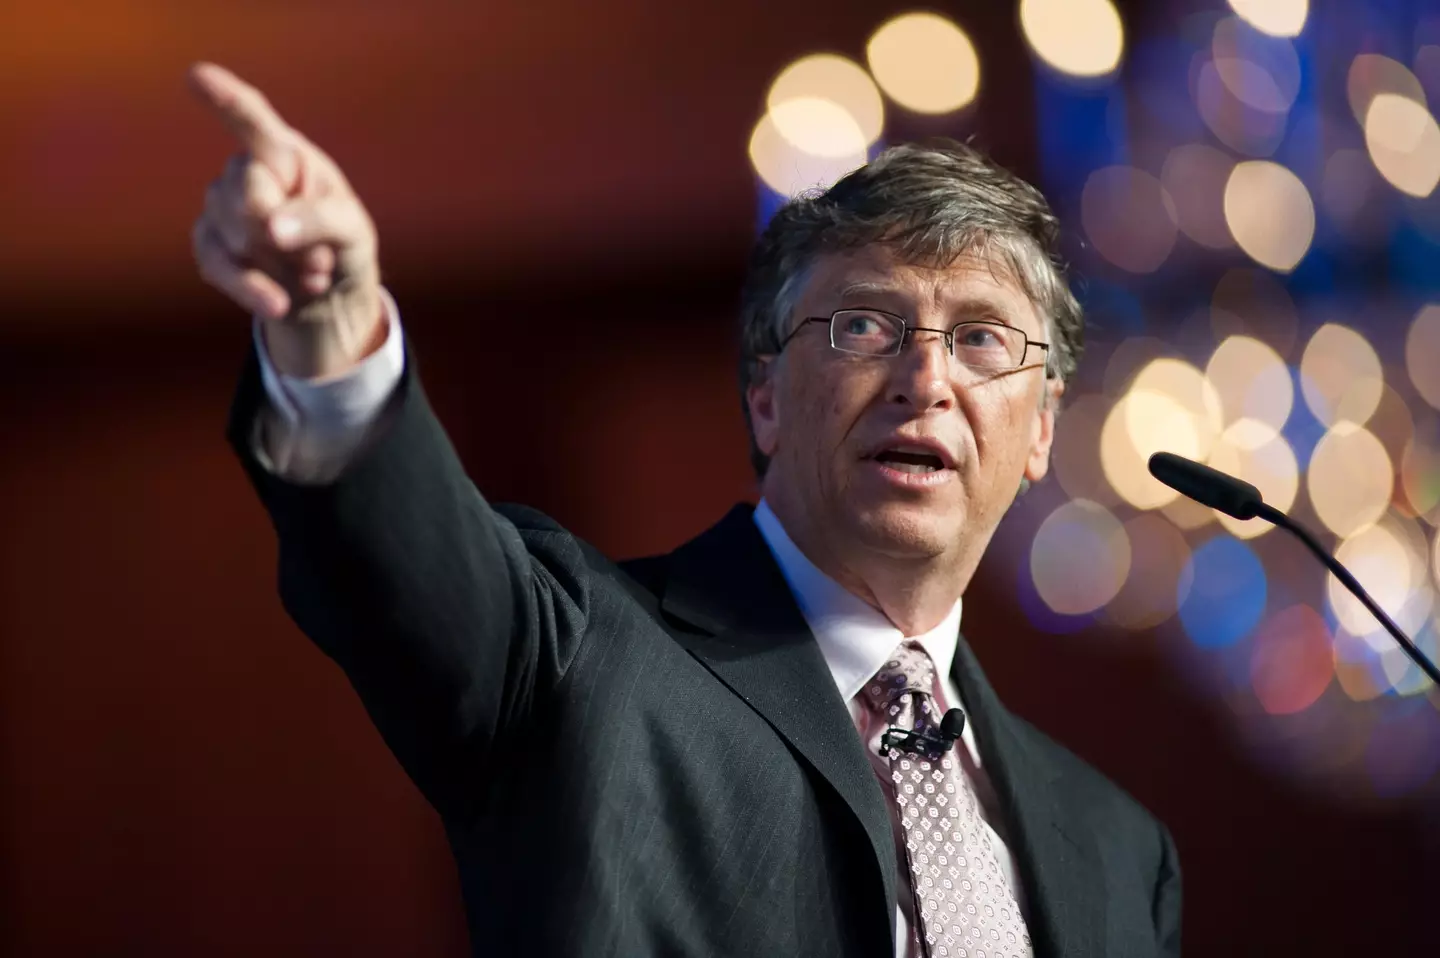 Bill Gates is second on the American rich list.